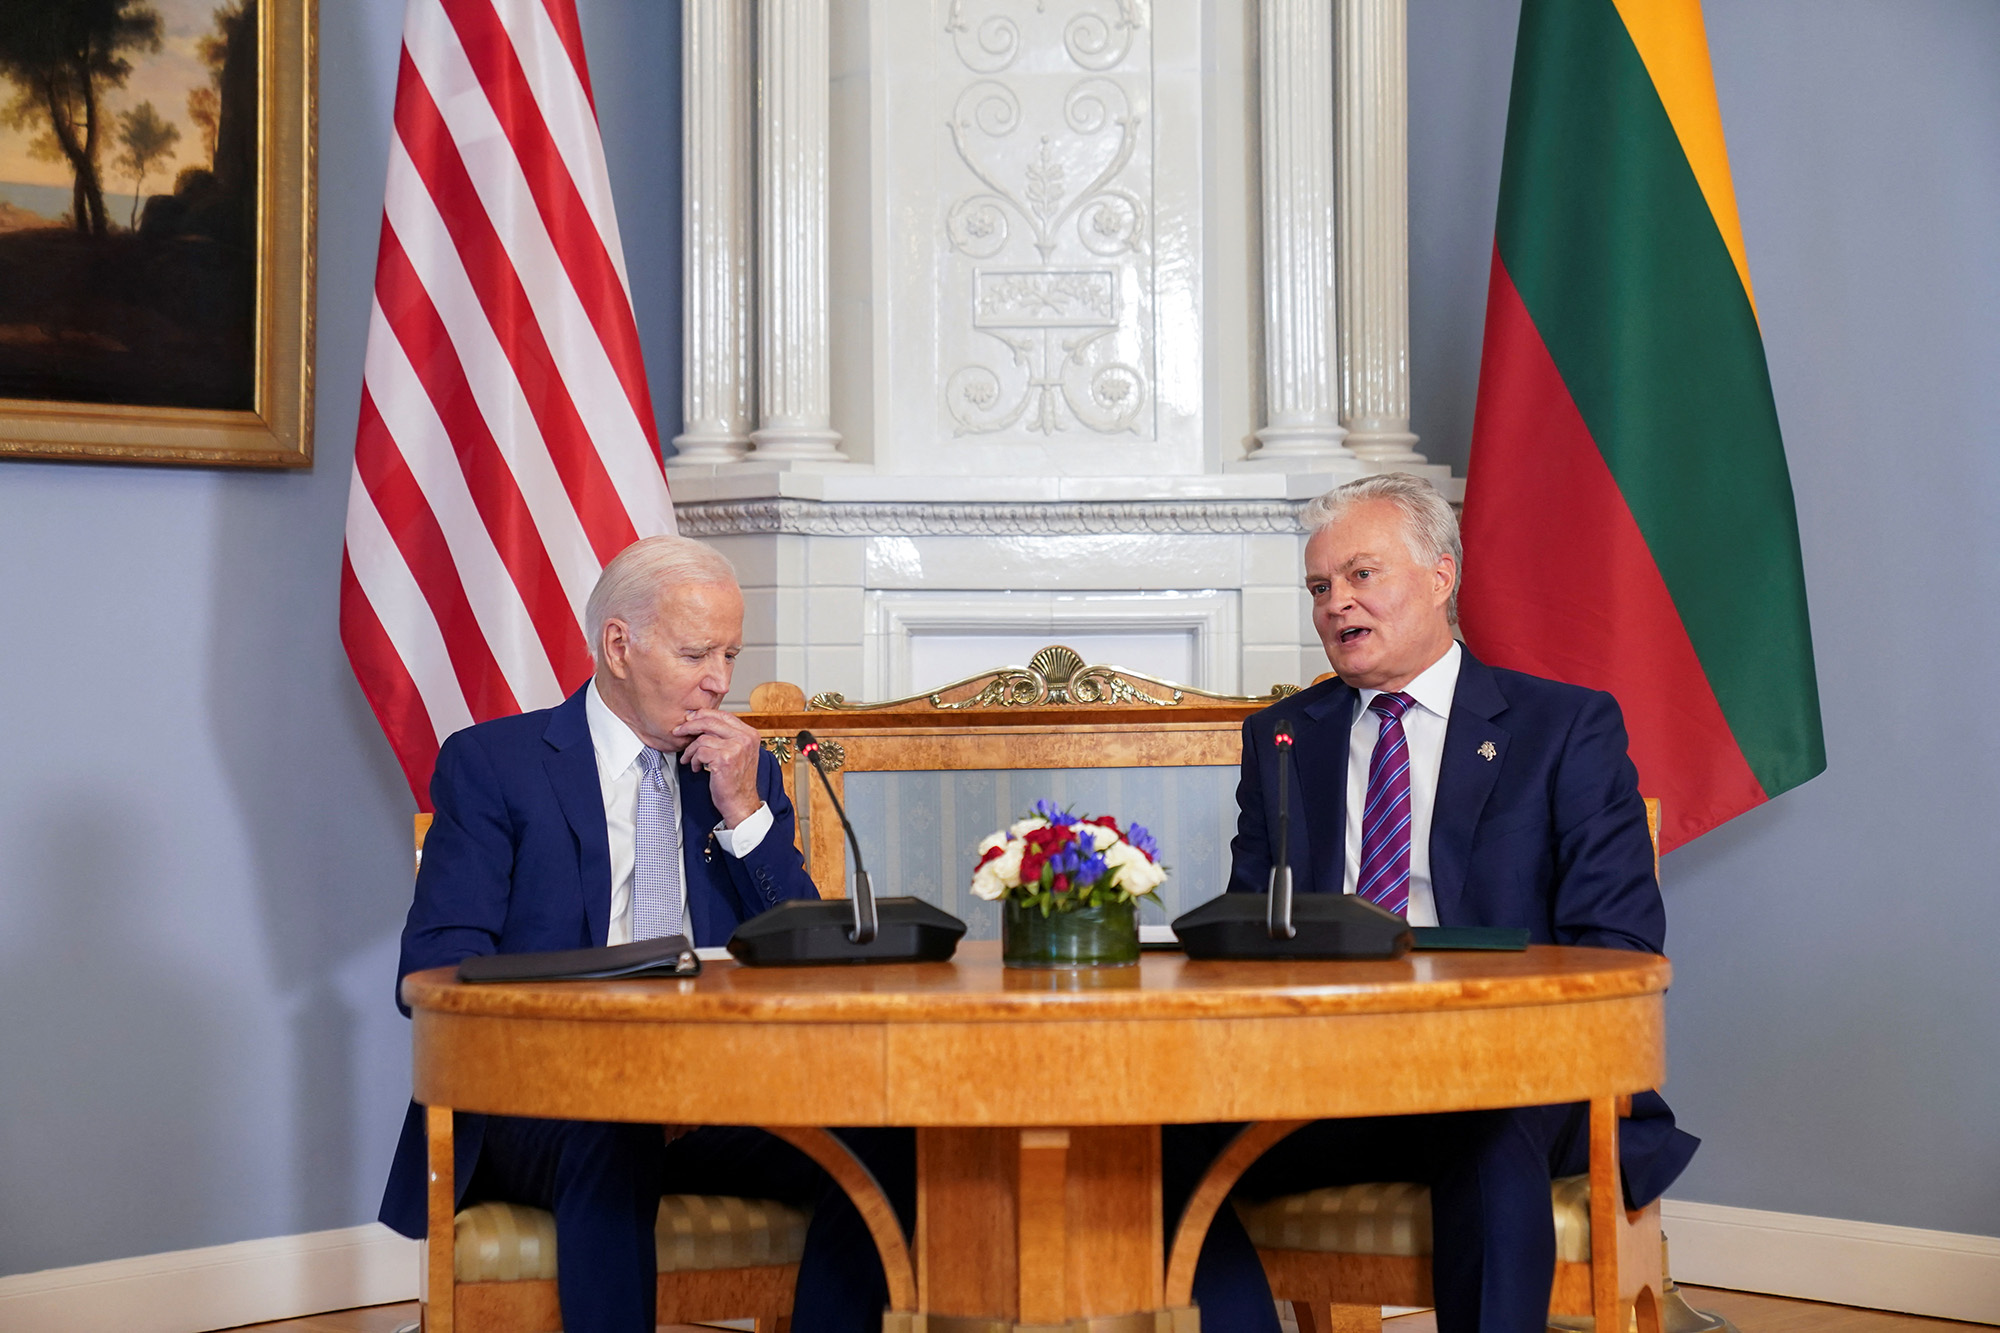 U.S. President Joe Biden, left, meets with Lithuanian President Gitanas Nauseda at the Presidential Palace in Vilnius, Lithuania, on July 11.